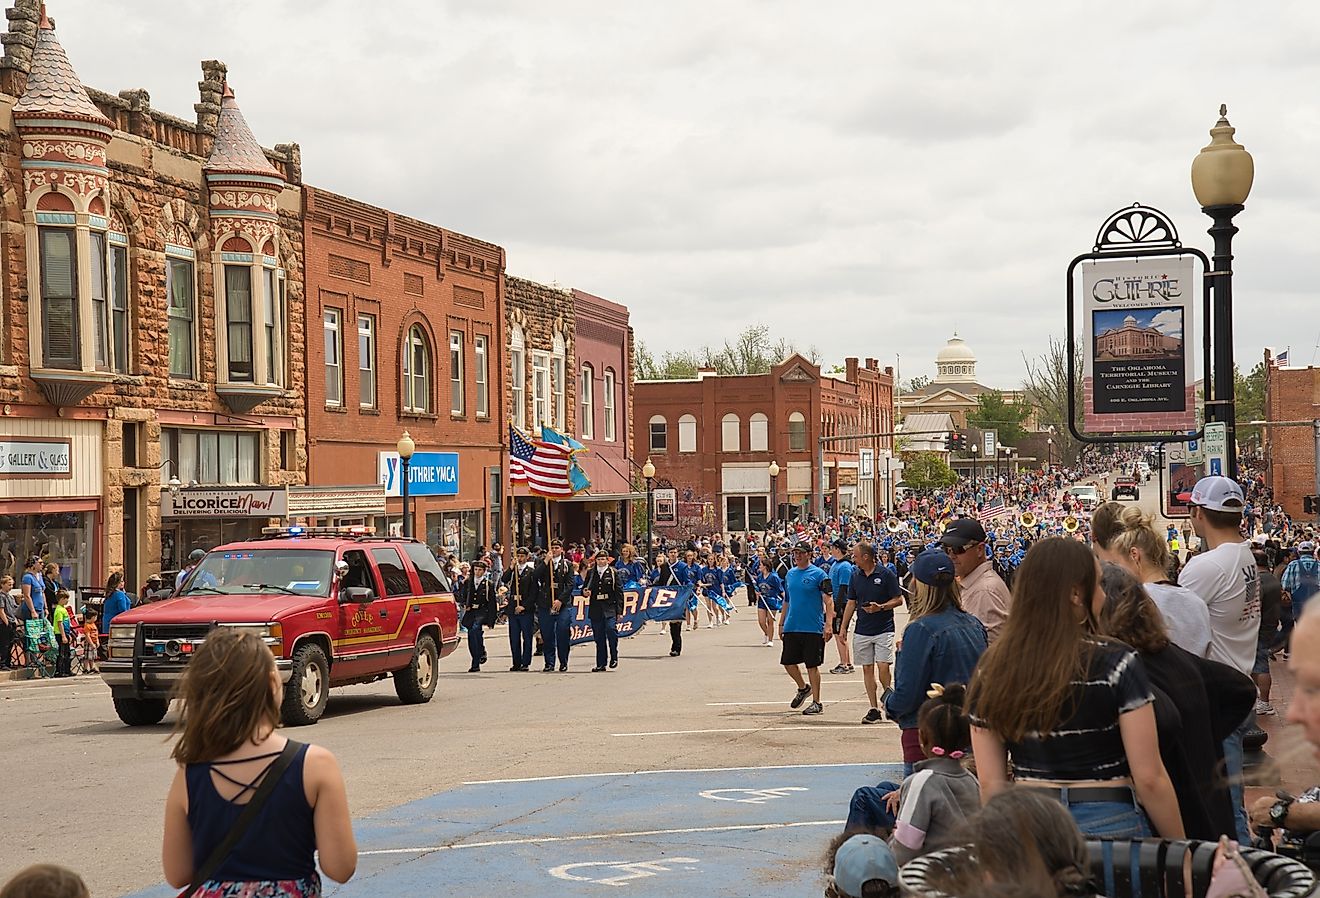 Downtown celebration in Guthrie, Oklahoma. Image credit Andreas Stroh via Shutterstock